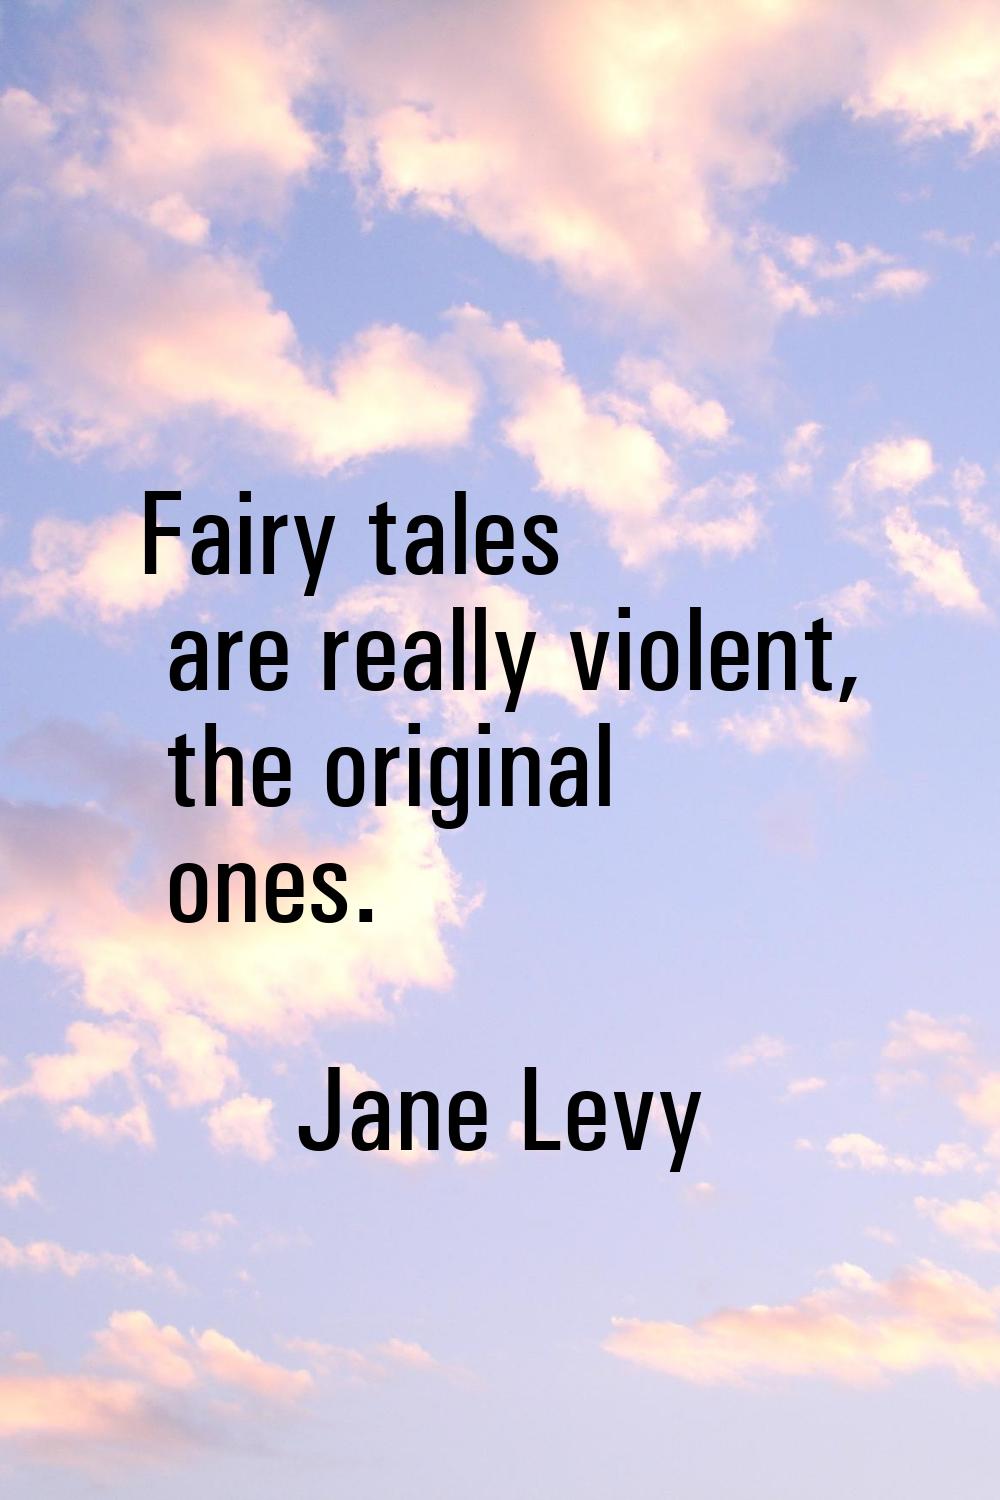 Fairy tales are really violent, the original ones.